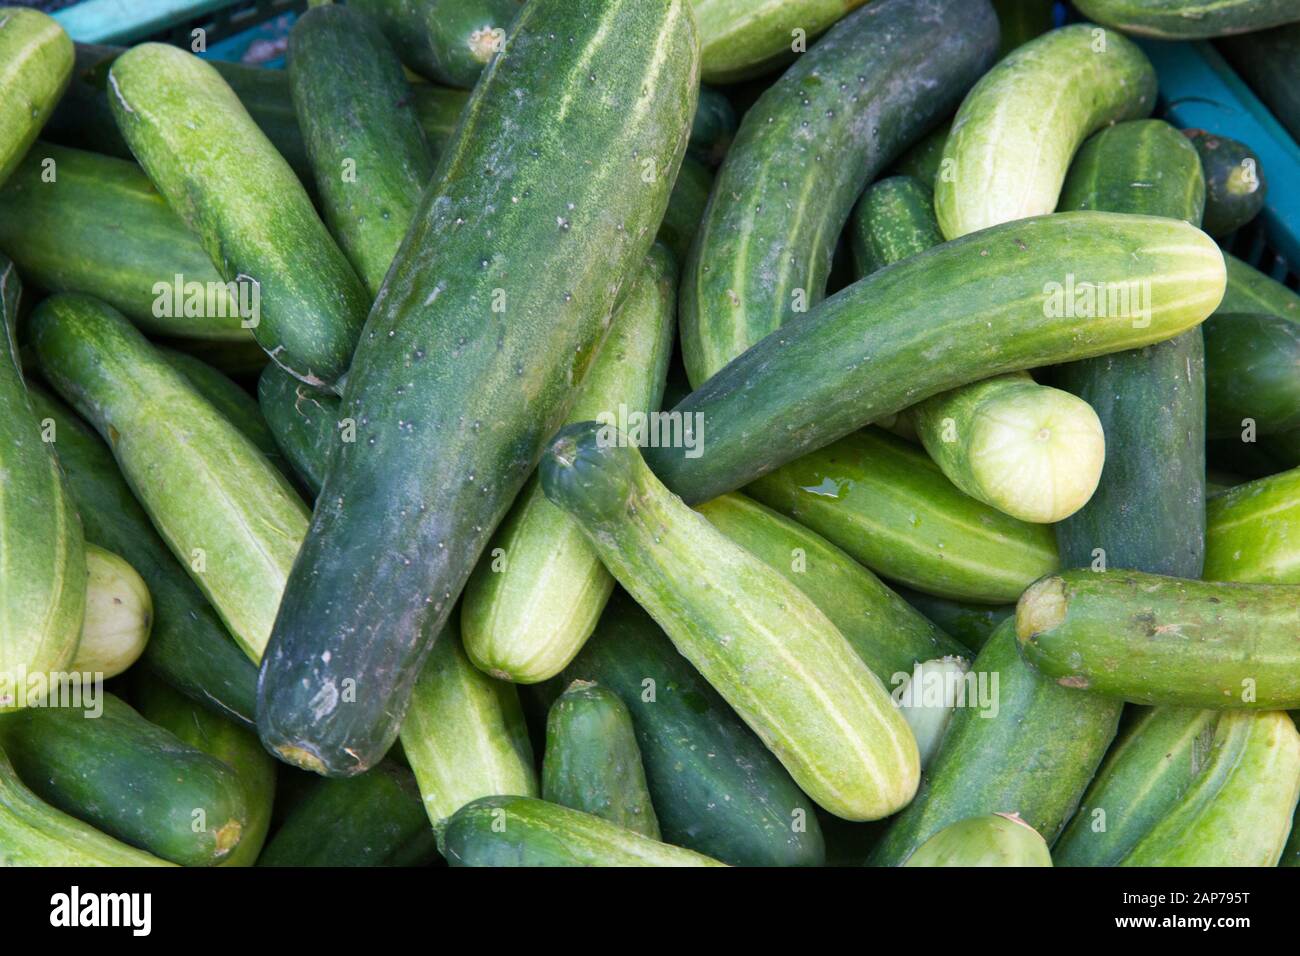 Cucumbers vegetables Thailand Stock Photo